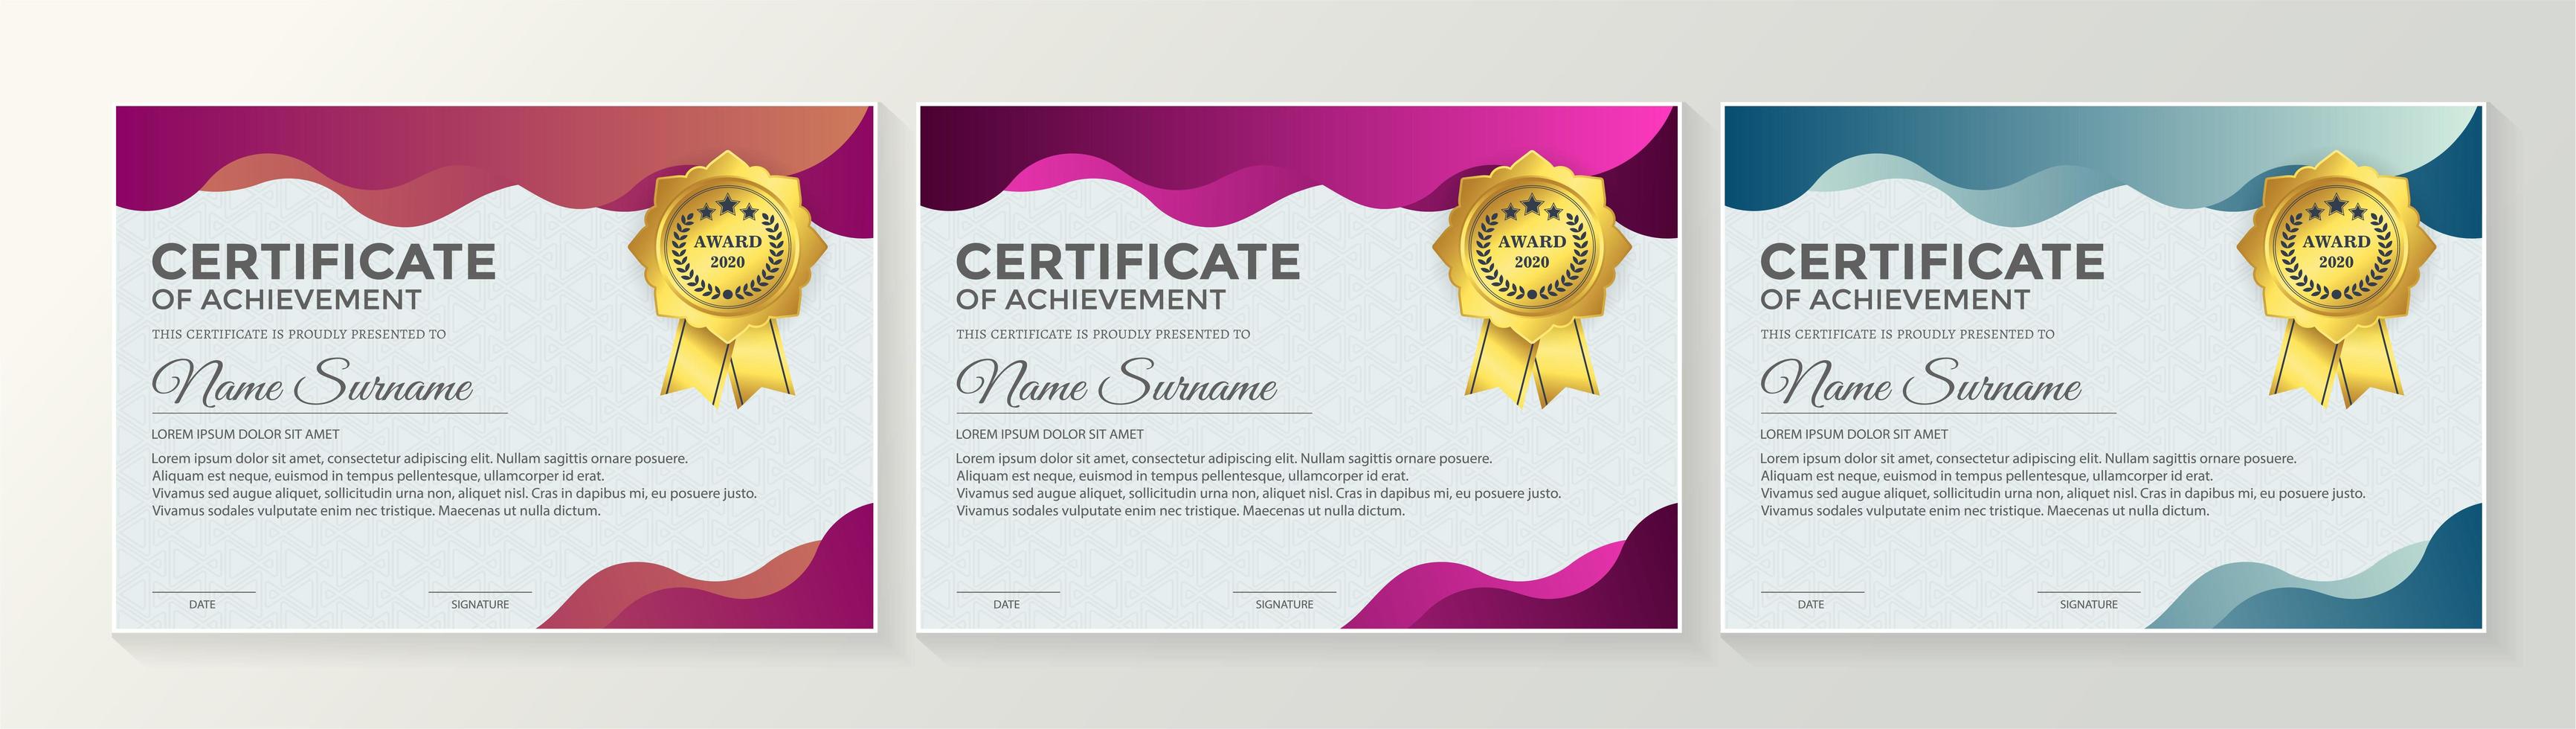 Blue certificate set with colorful wavy layers vector